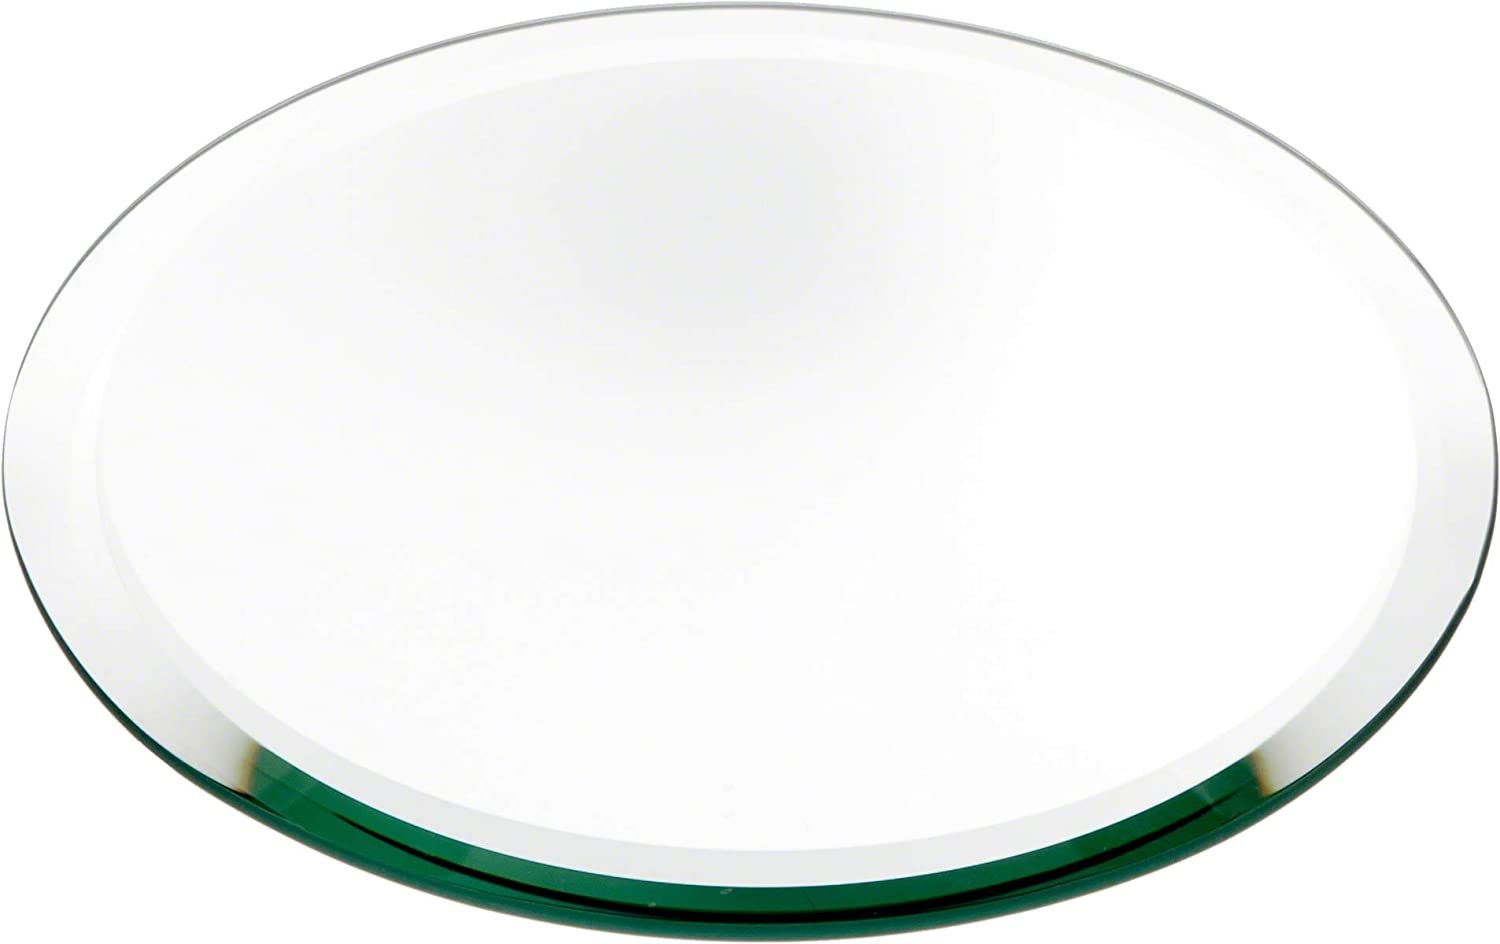 Primary image for 8 X 8 Inch Plymor Round 5Mm Beveled Glass Mirror.